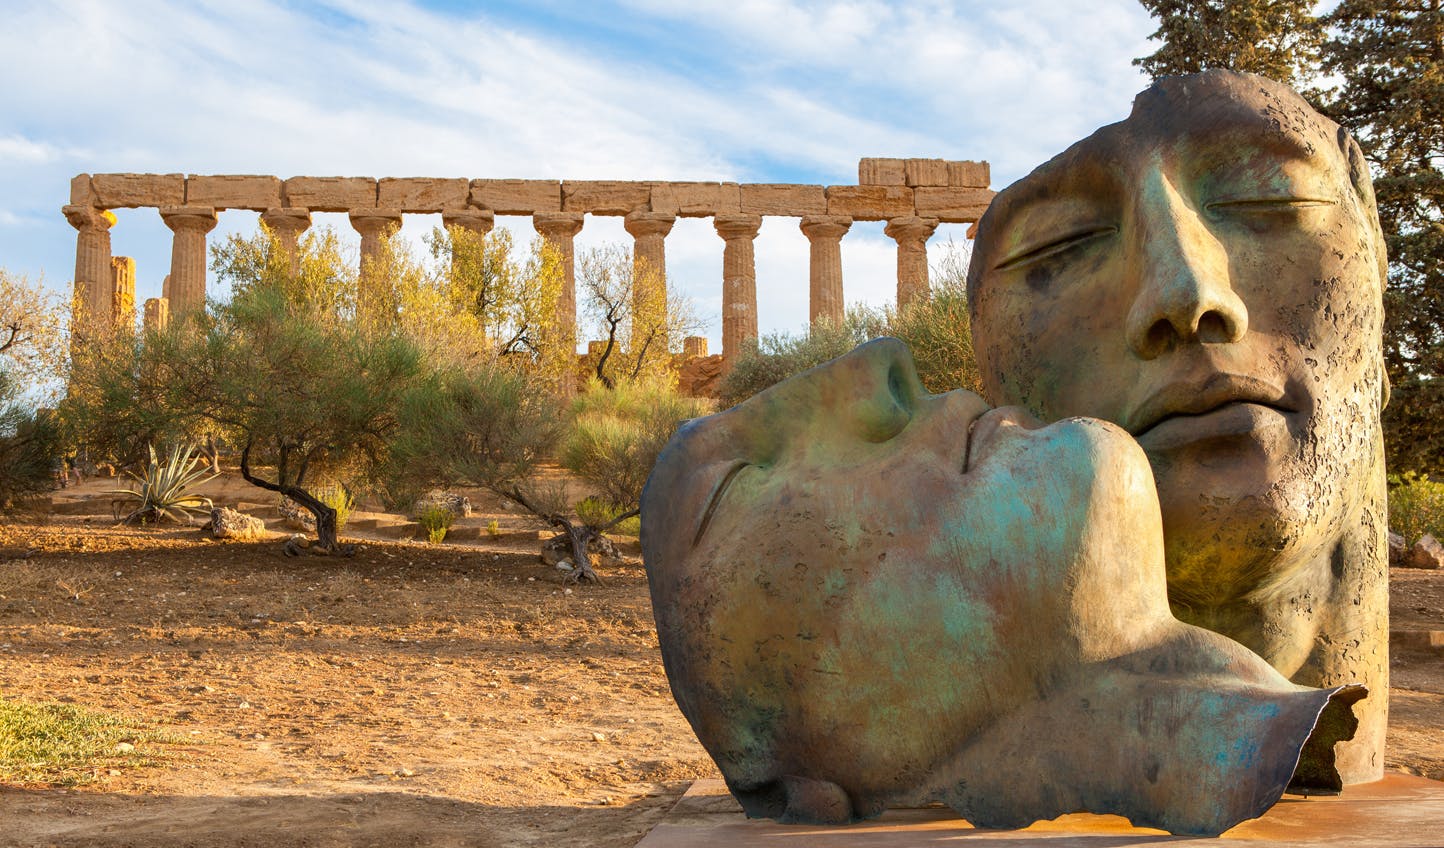 Discover the rich history of Sicily